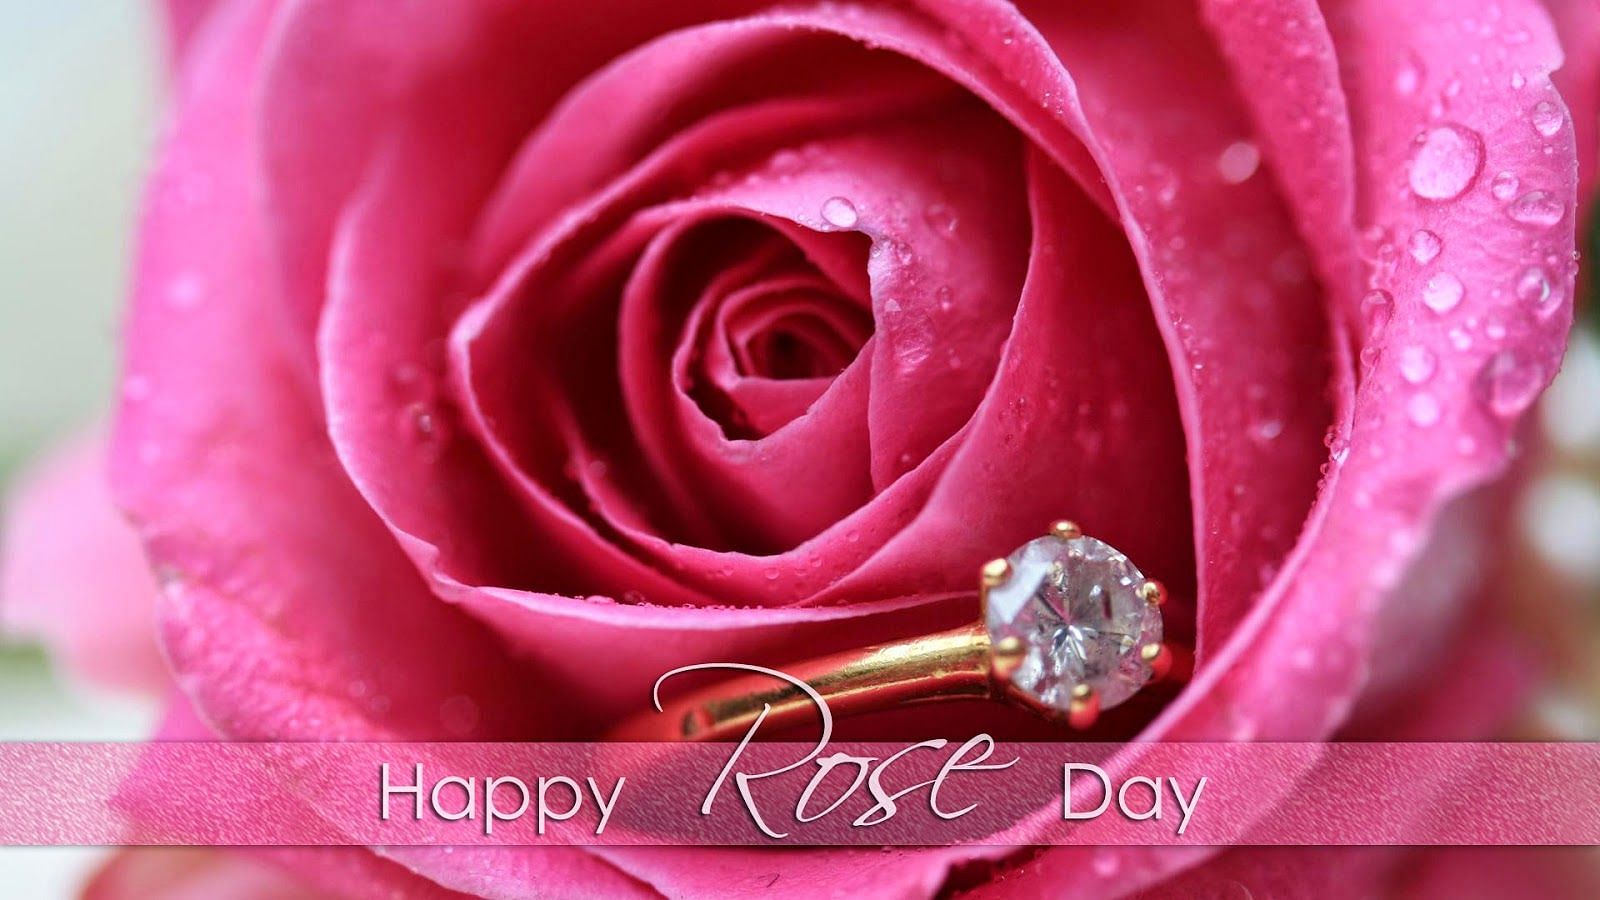 Beautiful Rose Day Wishes Images, 7 Feb Rose Day Images